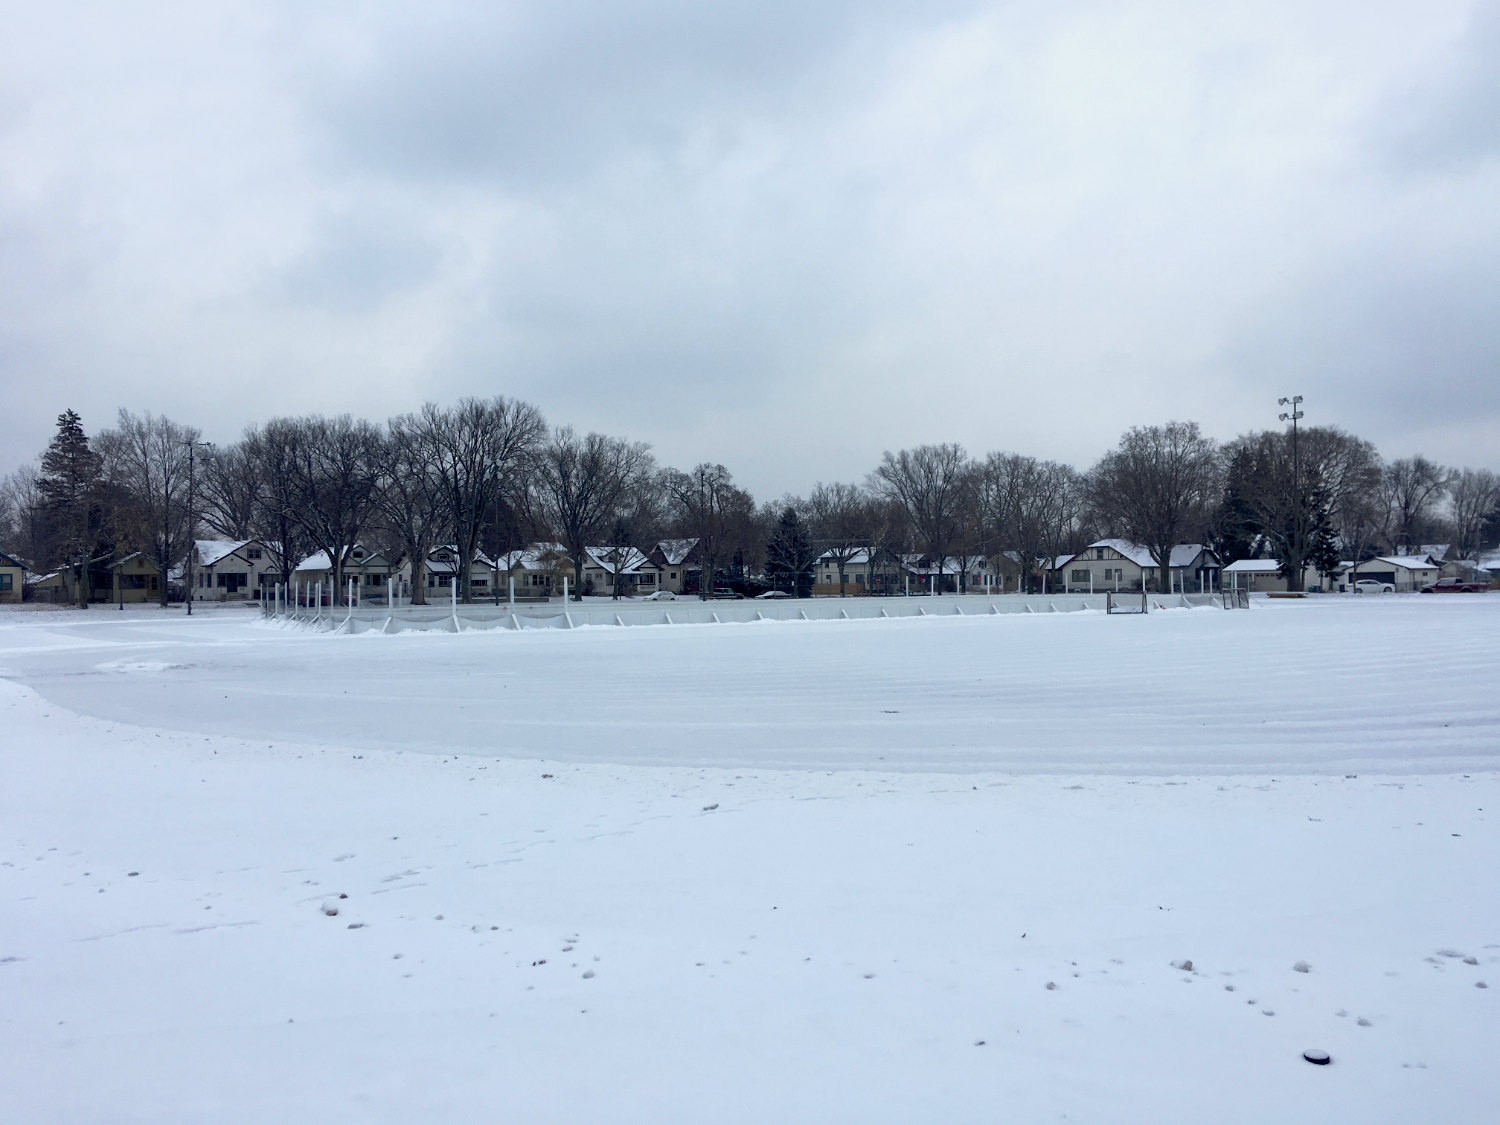 gray expanse of snow and ice rink with horizon line of bare trees and houses